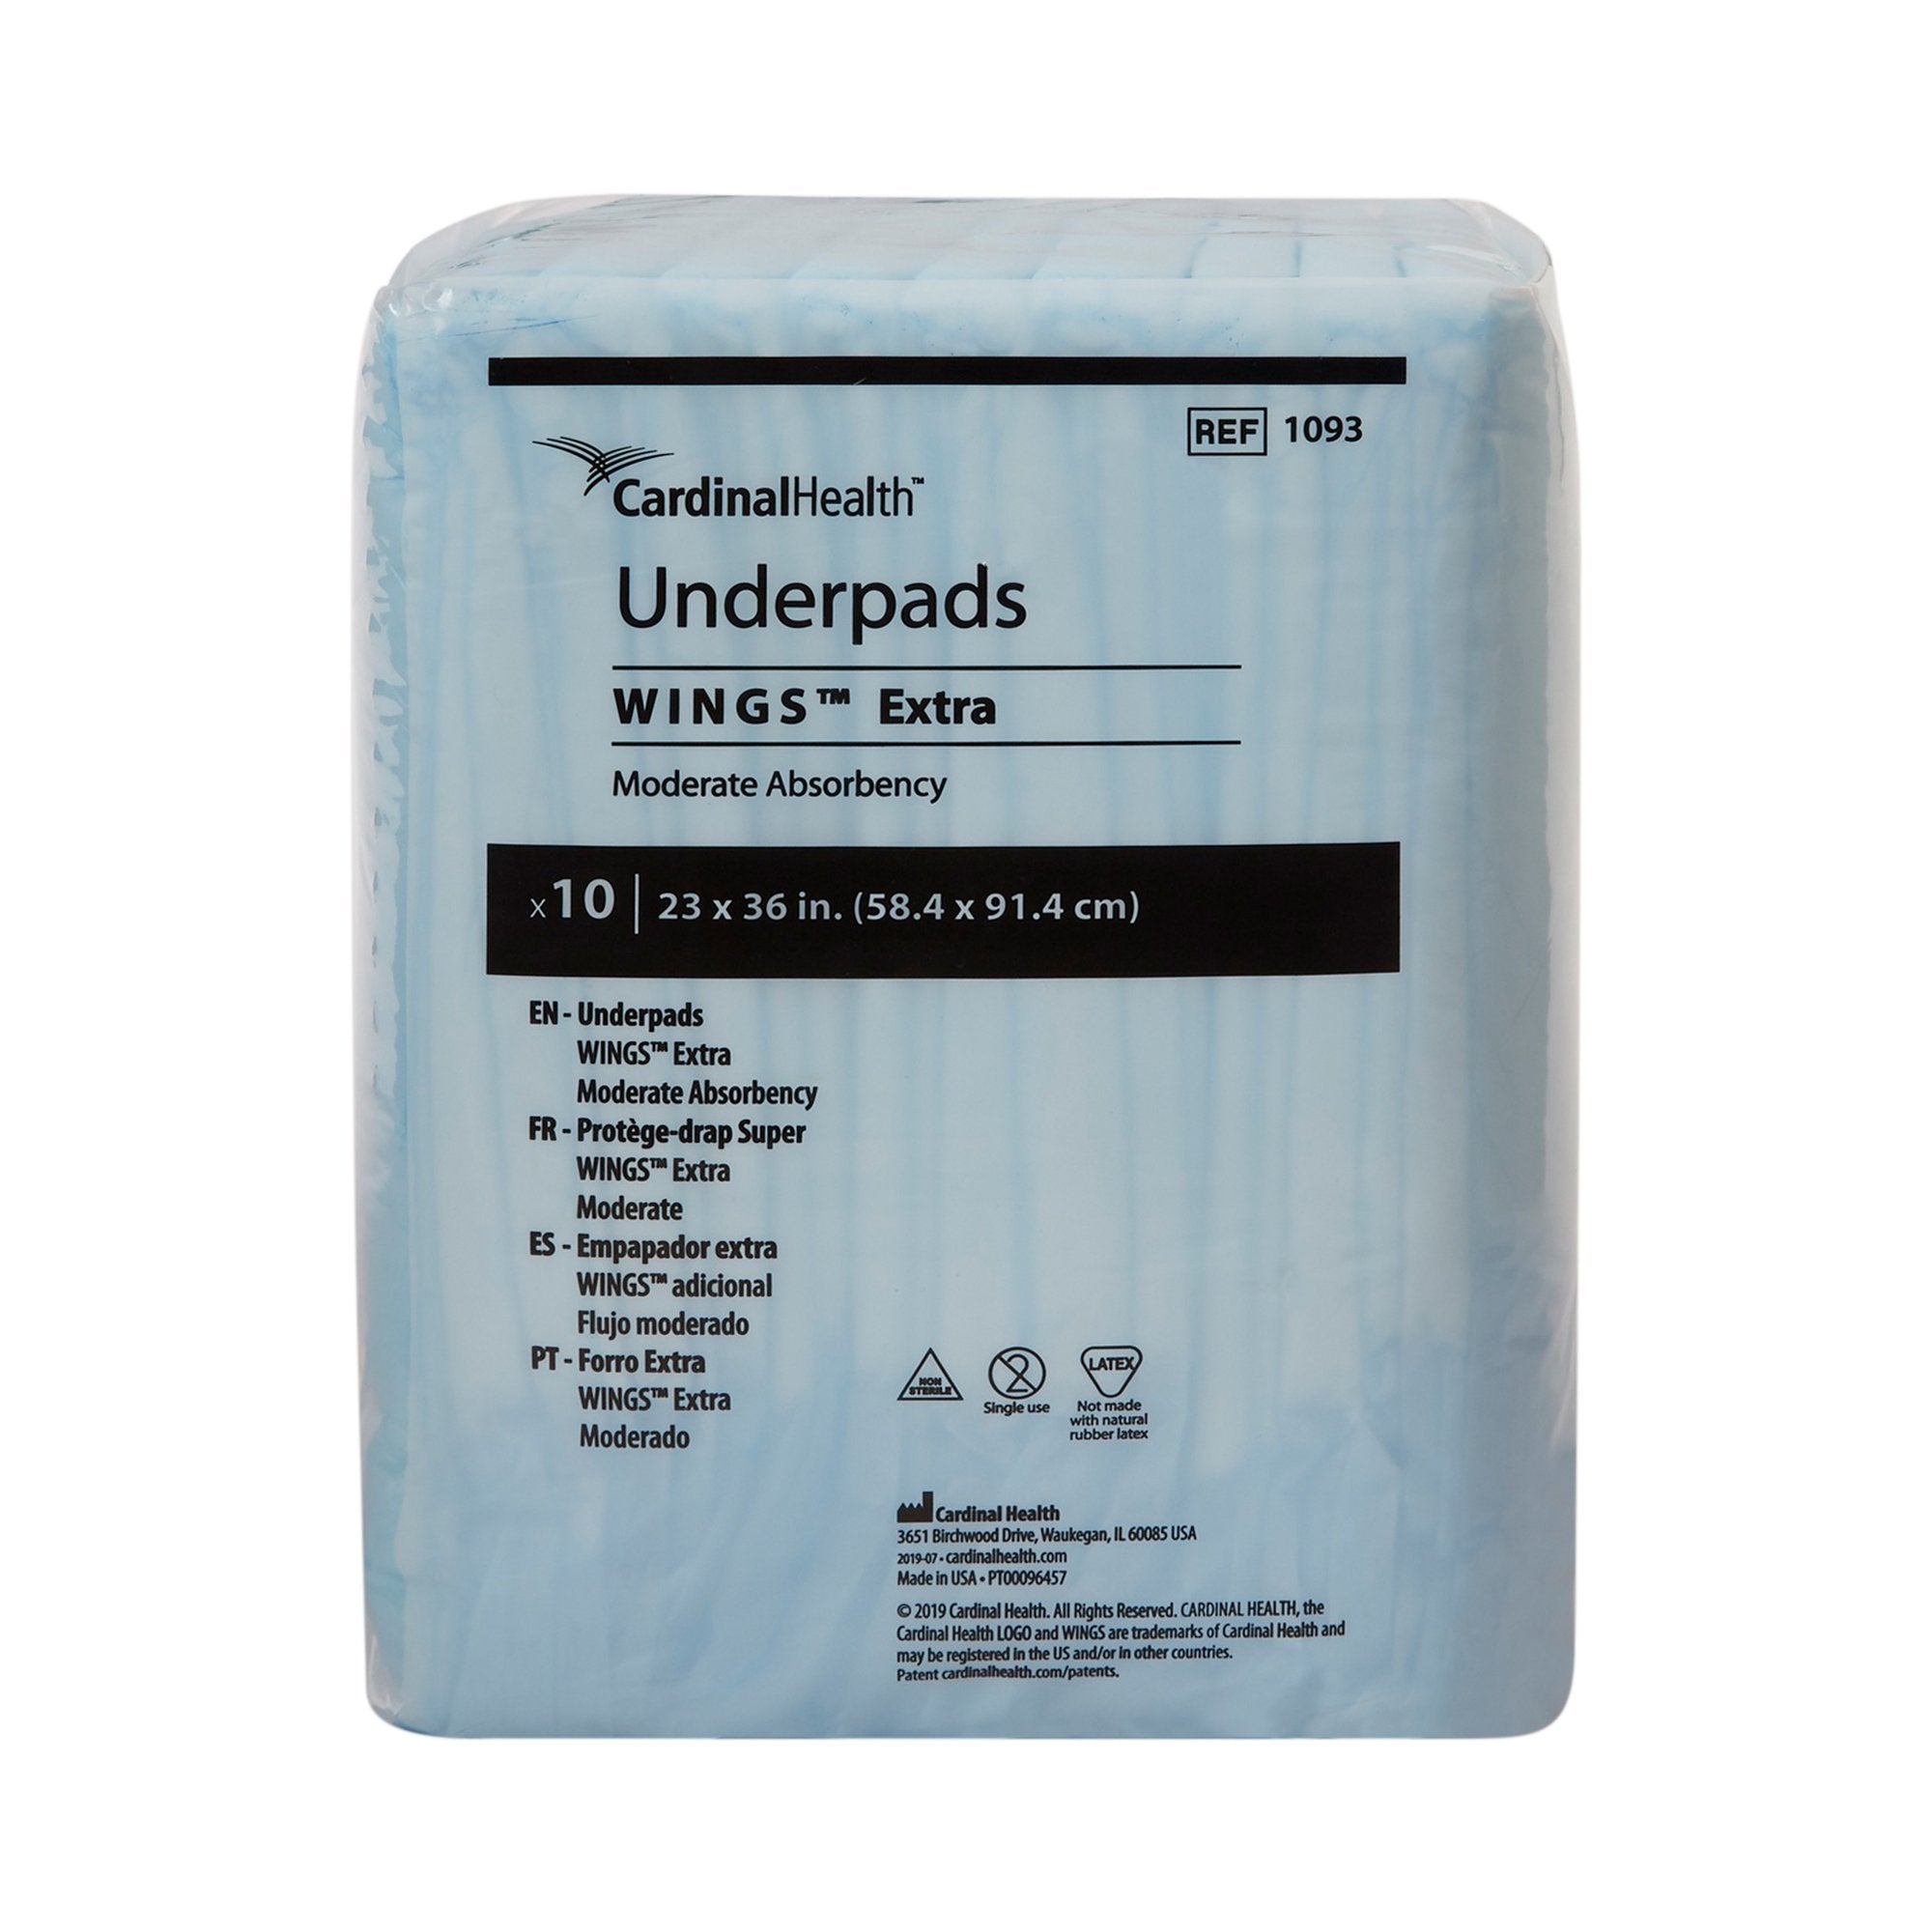 Disposable Underpad Simplicity Extra 23 X 36 Inch Fluff Moderate Absorbency